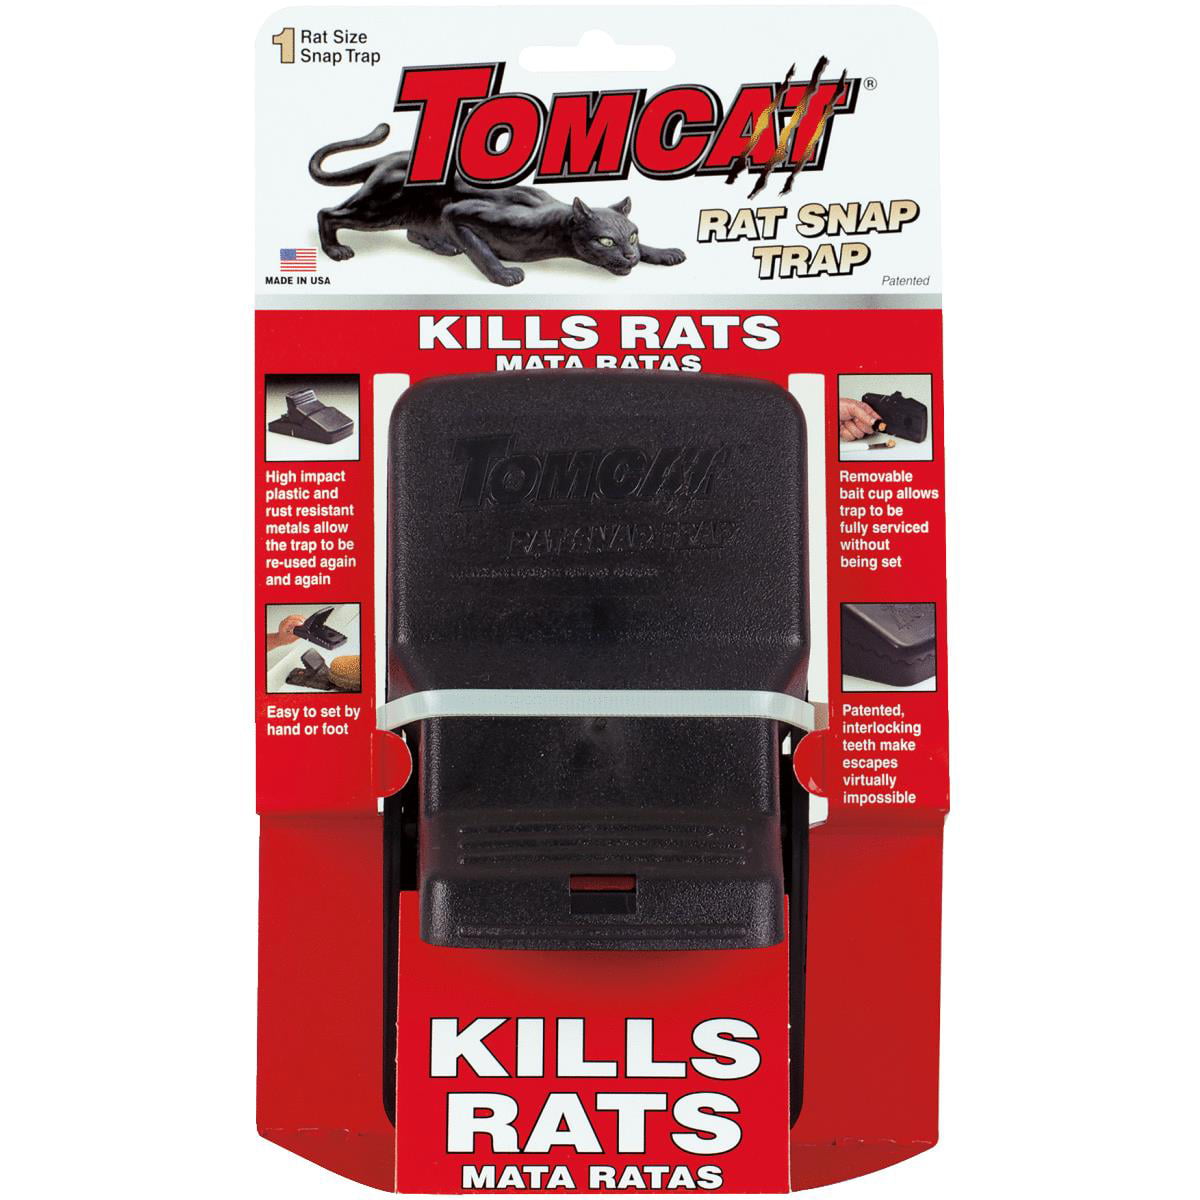 NEW TOMCAT Small Rat Trap Snap Bait Station 0361710 6-Pack! 